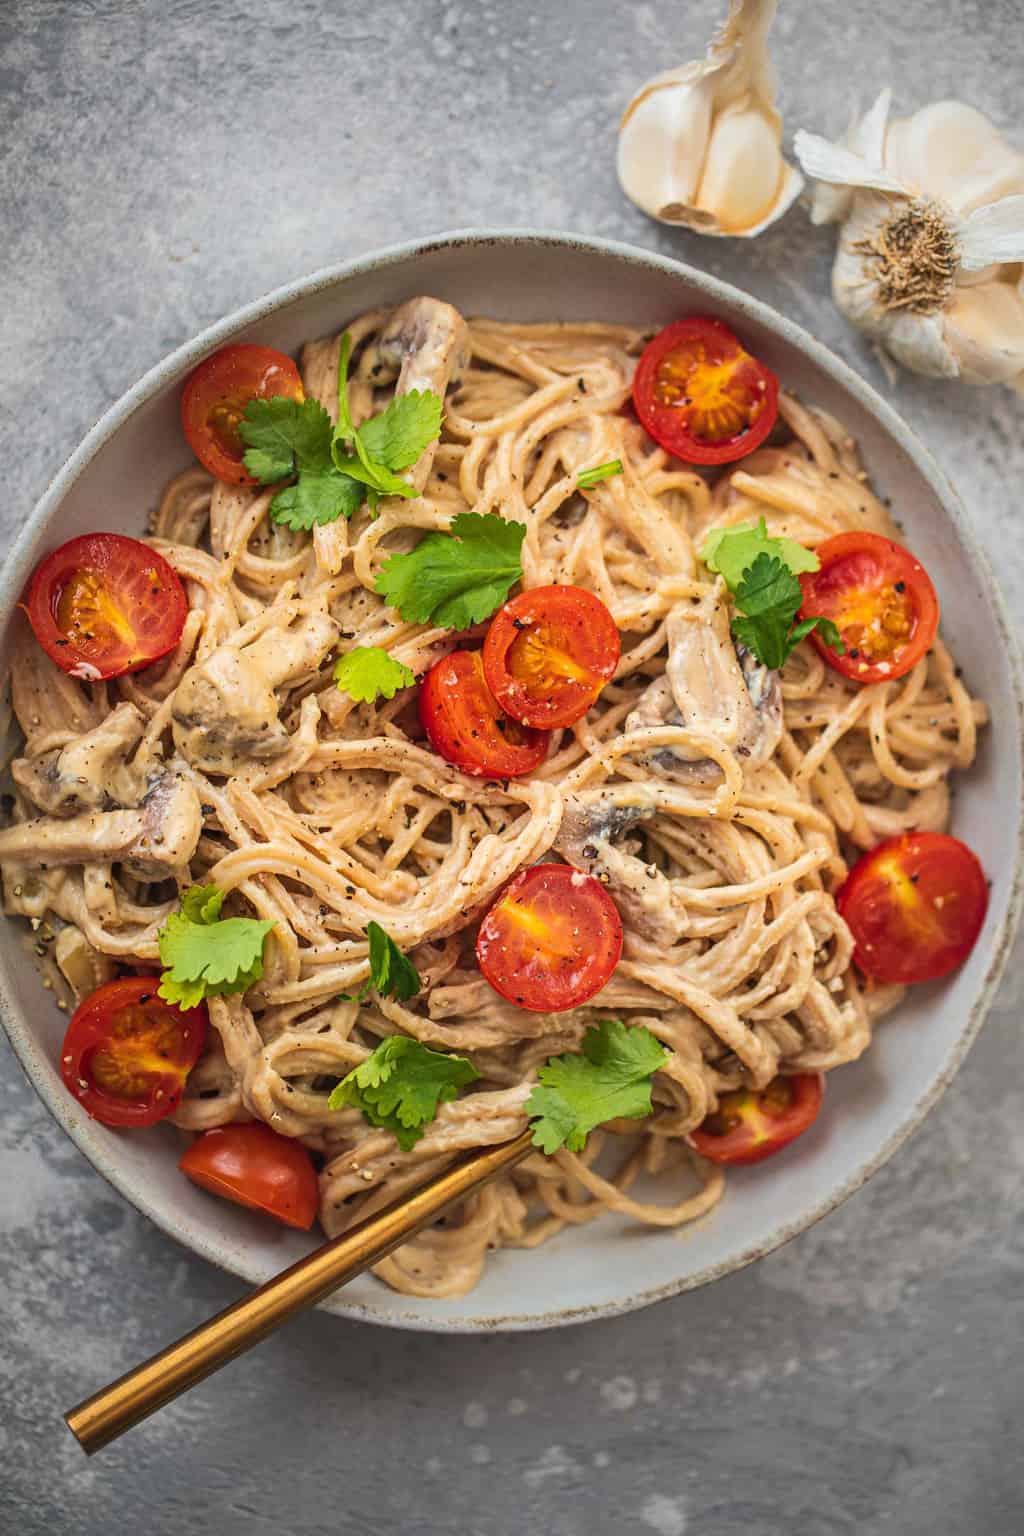 Bowl with pasta in a creamy sauce with tomatoes